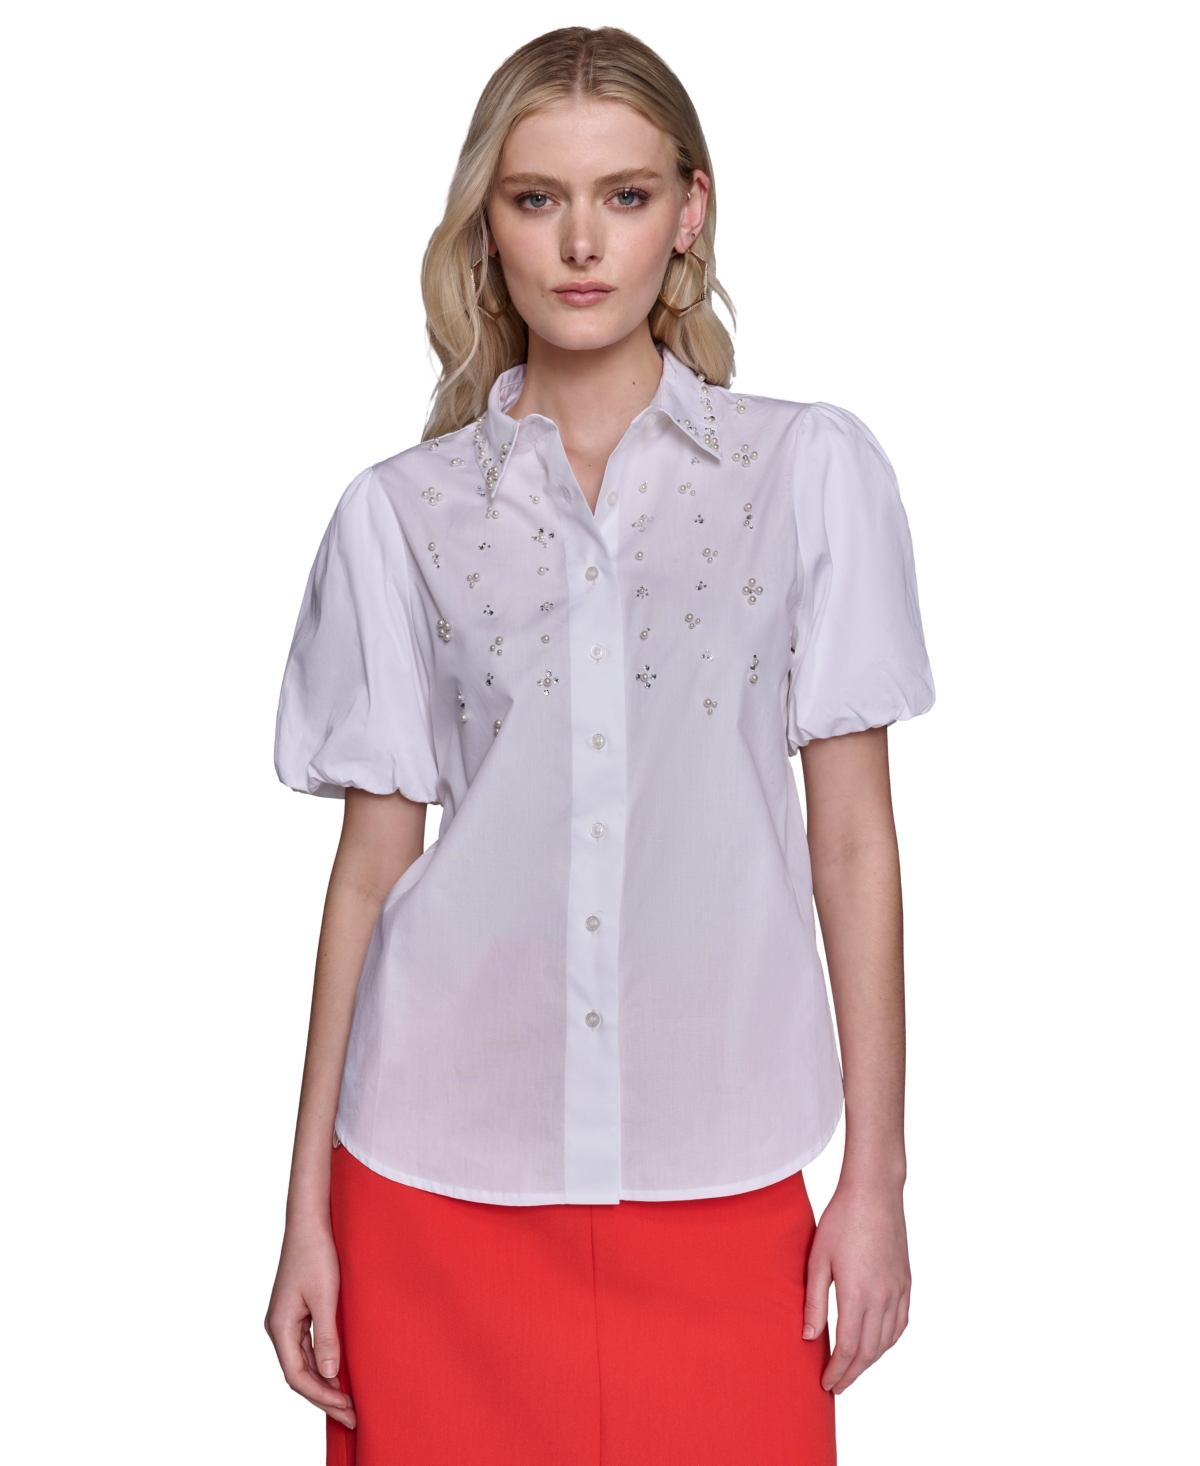 Karl Lagerfeld Women's Embellished Cotton Crinkle Top In Soft White